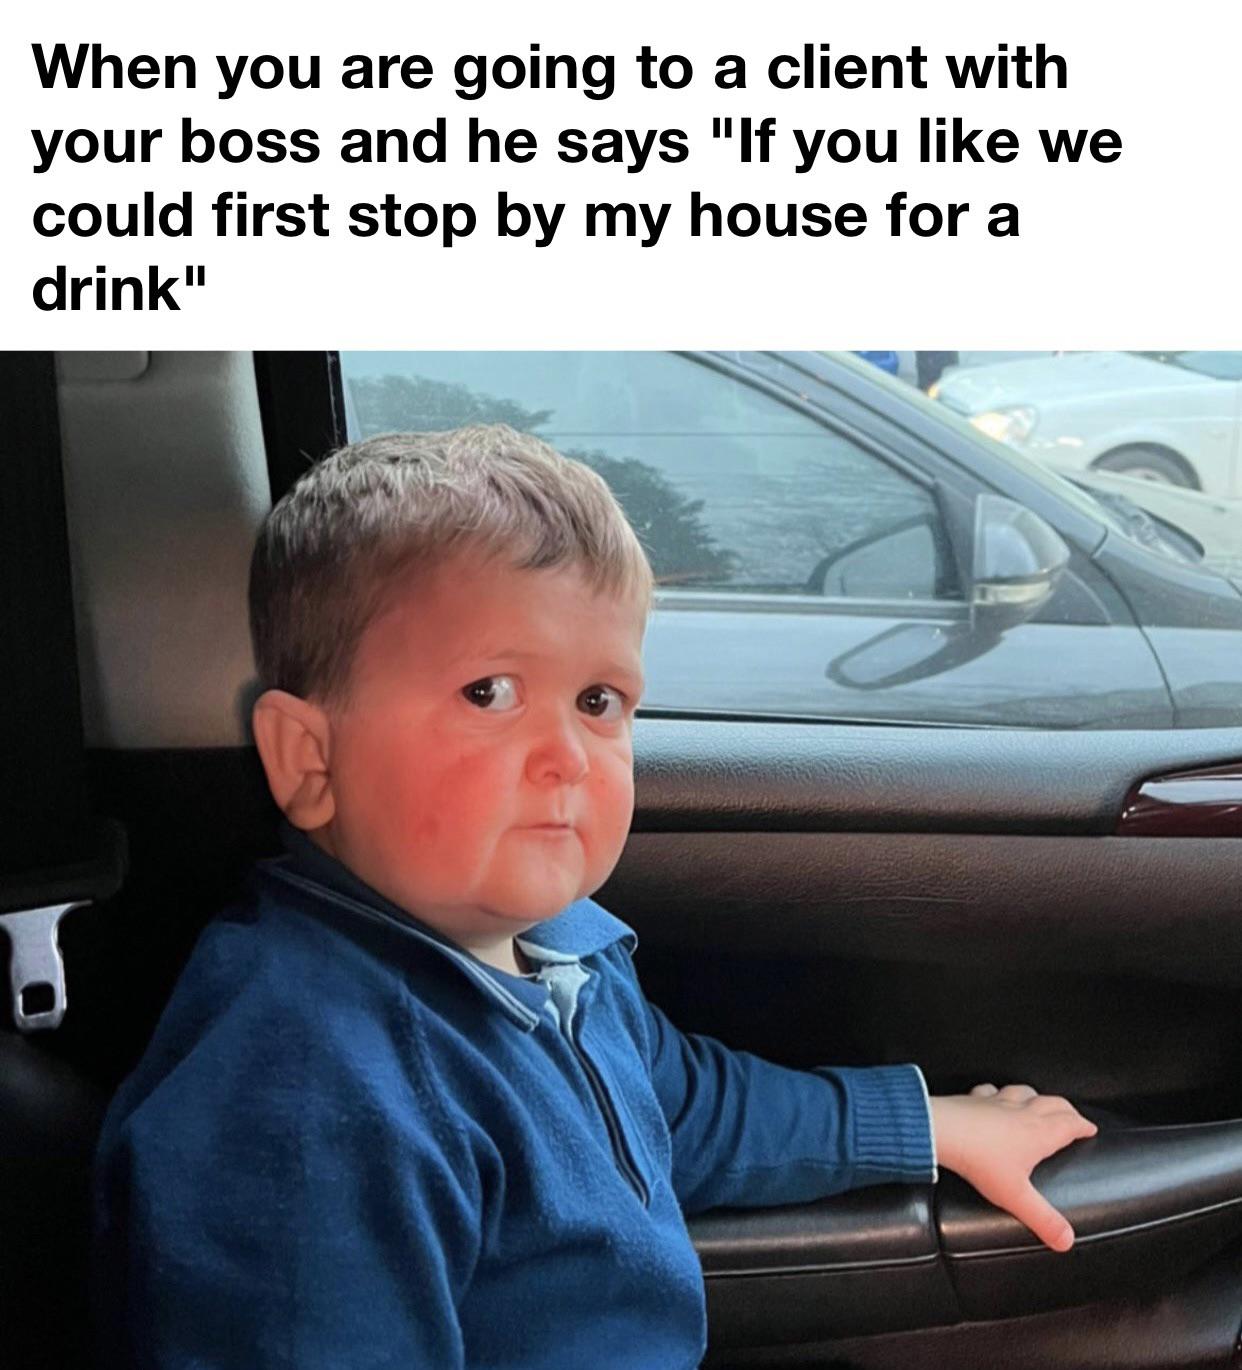 funny memes - meme boy car - When you are going to a client with your boss and he says "If you we could first stop by my house for a drink"